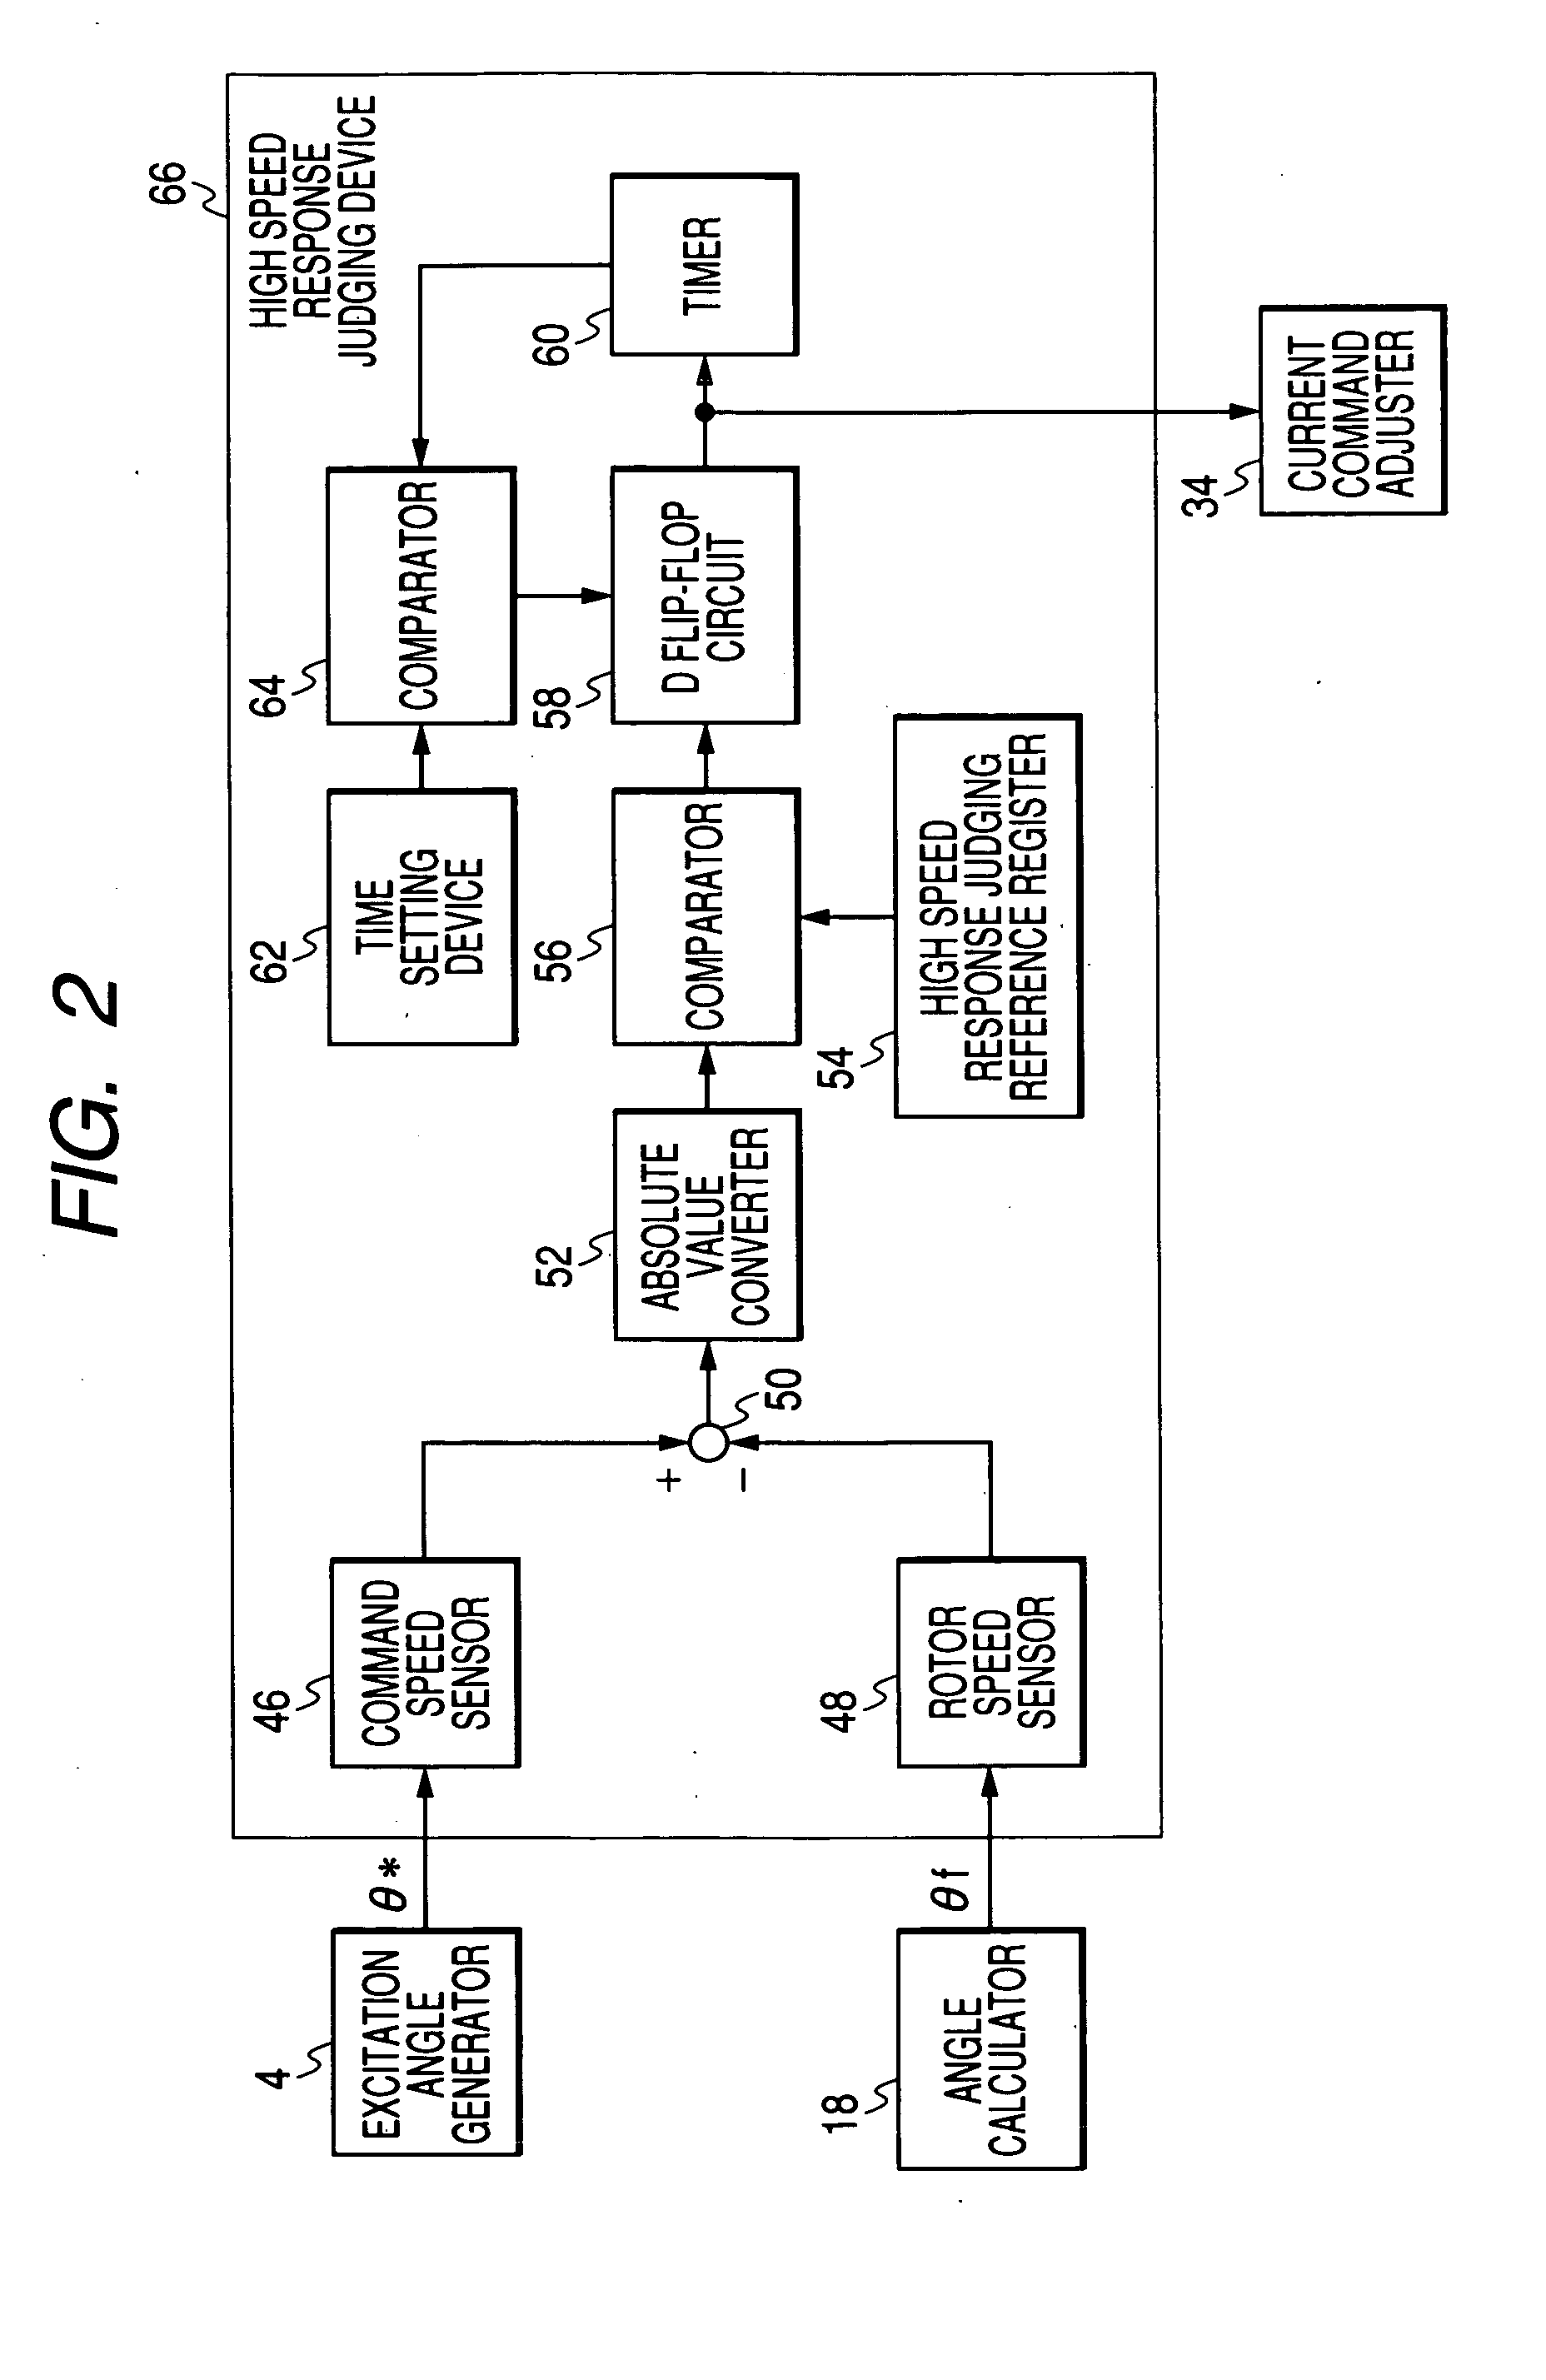 Stepping motor driver